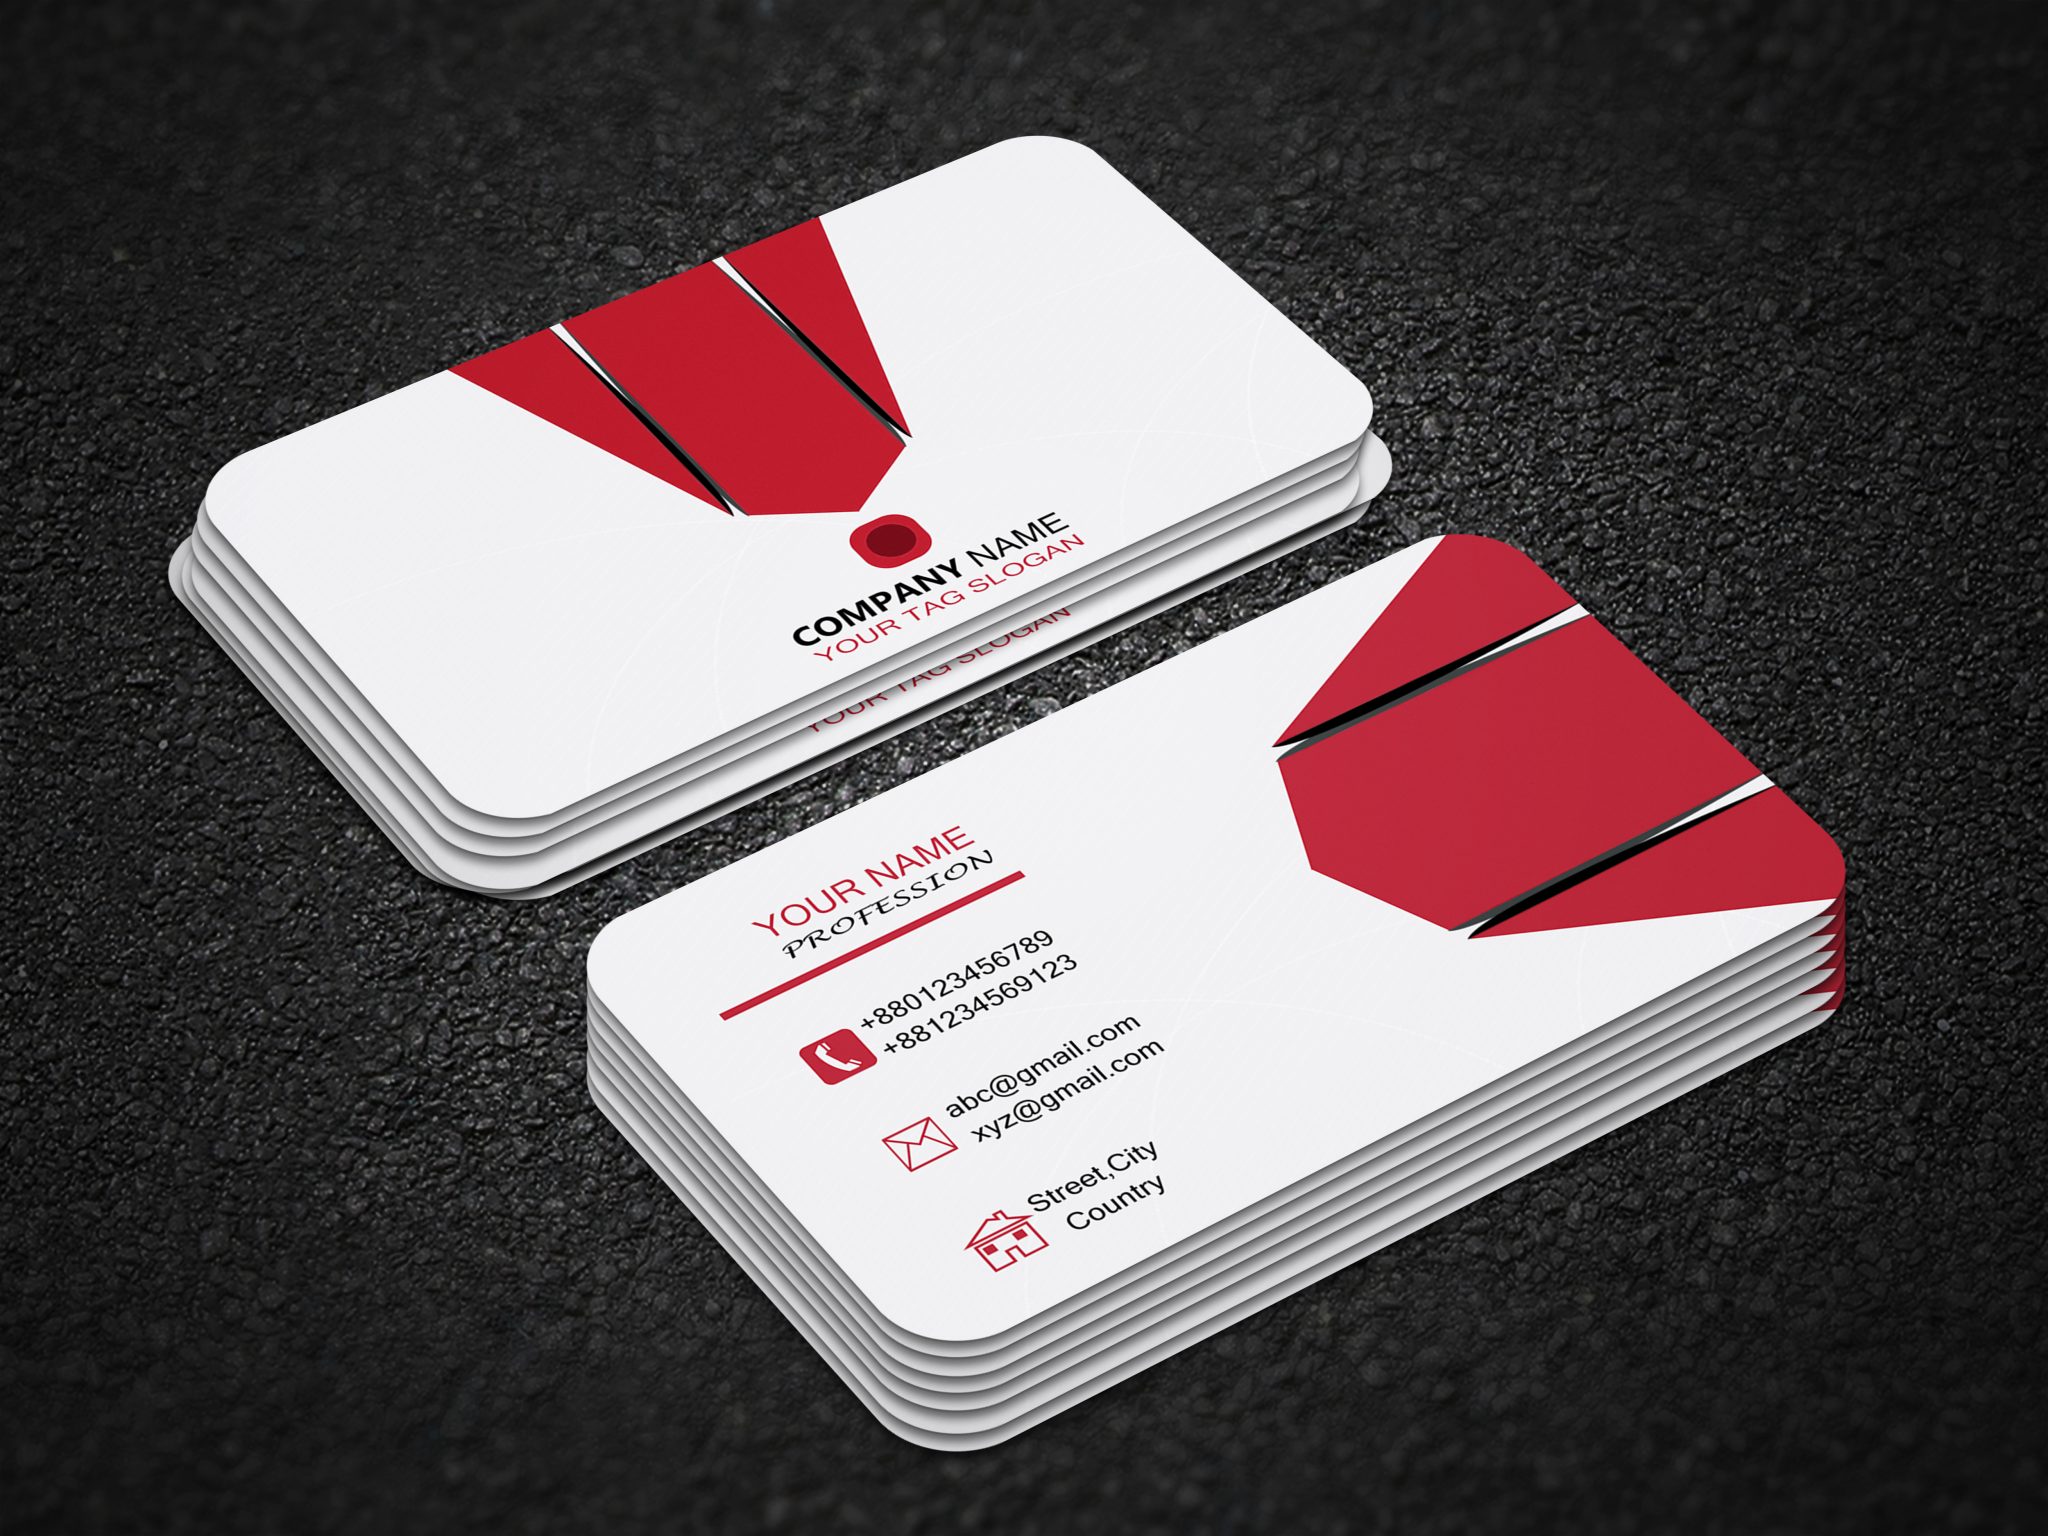 best-business-card-printing-services-dallas-tx-business-cards-printing-near-me